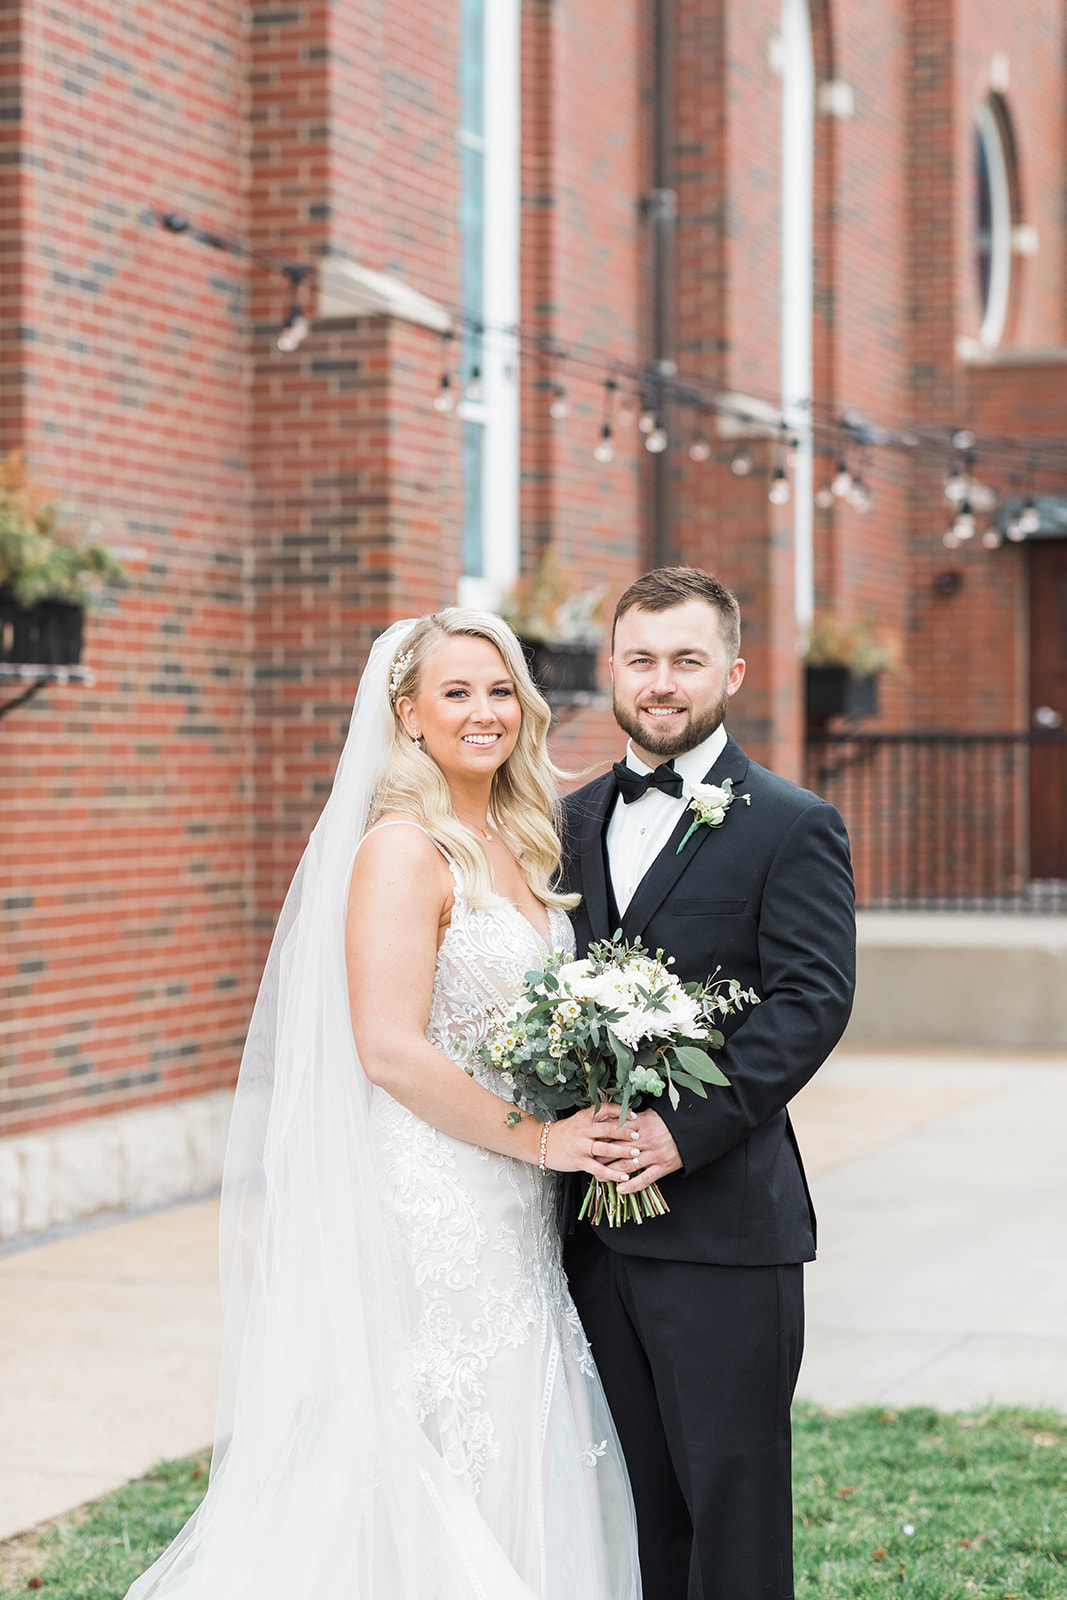 Couple married at Main Street Abbey in Columbia, IL